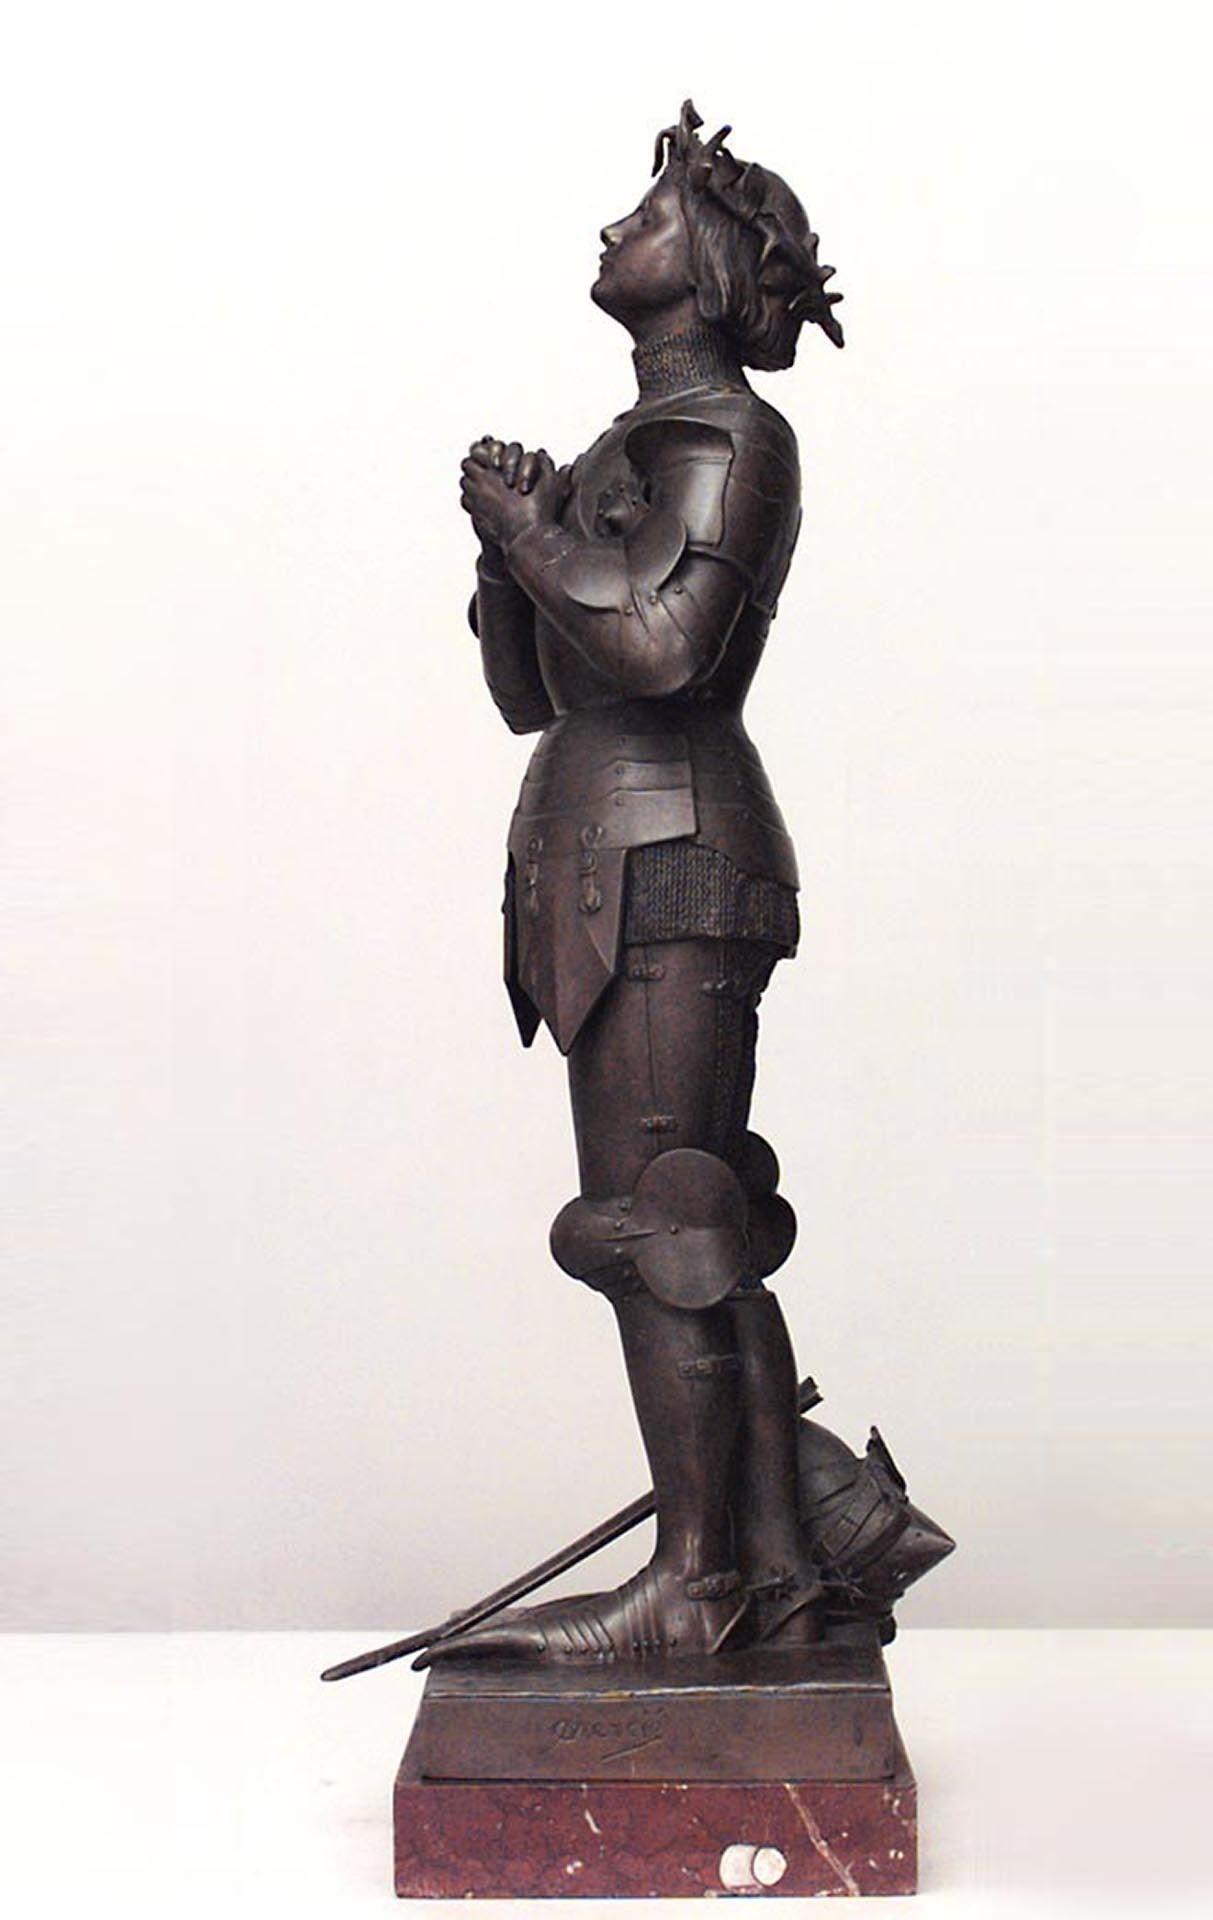 19th century French patinated metal figure of Joan of Arc standing on a rectangular rouge marble base, by Marius-Jean-Antonin Mercie b.1845-d.1916.